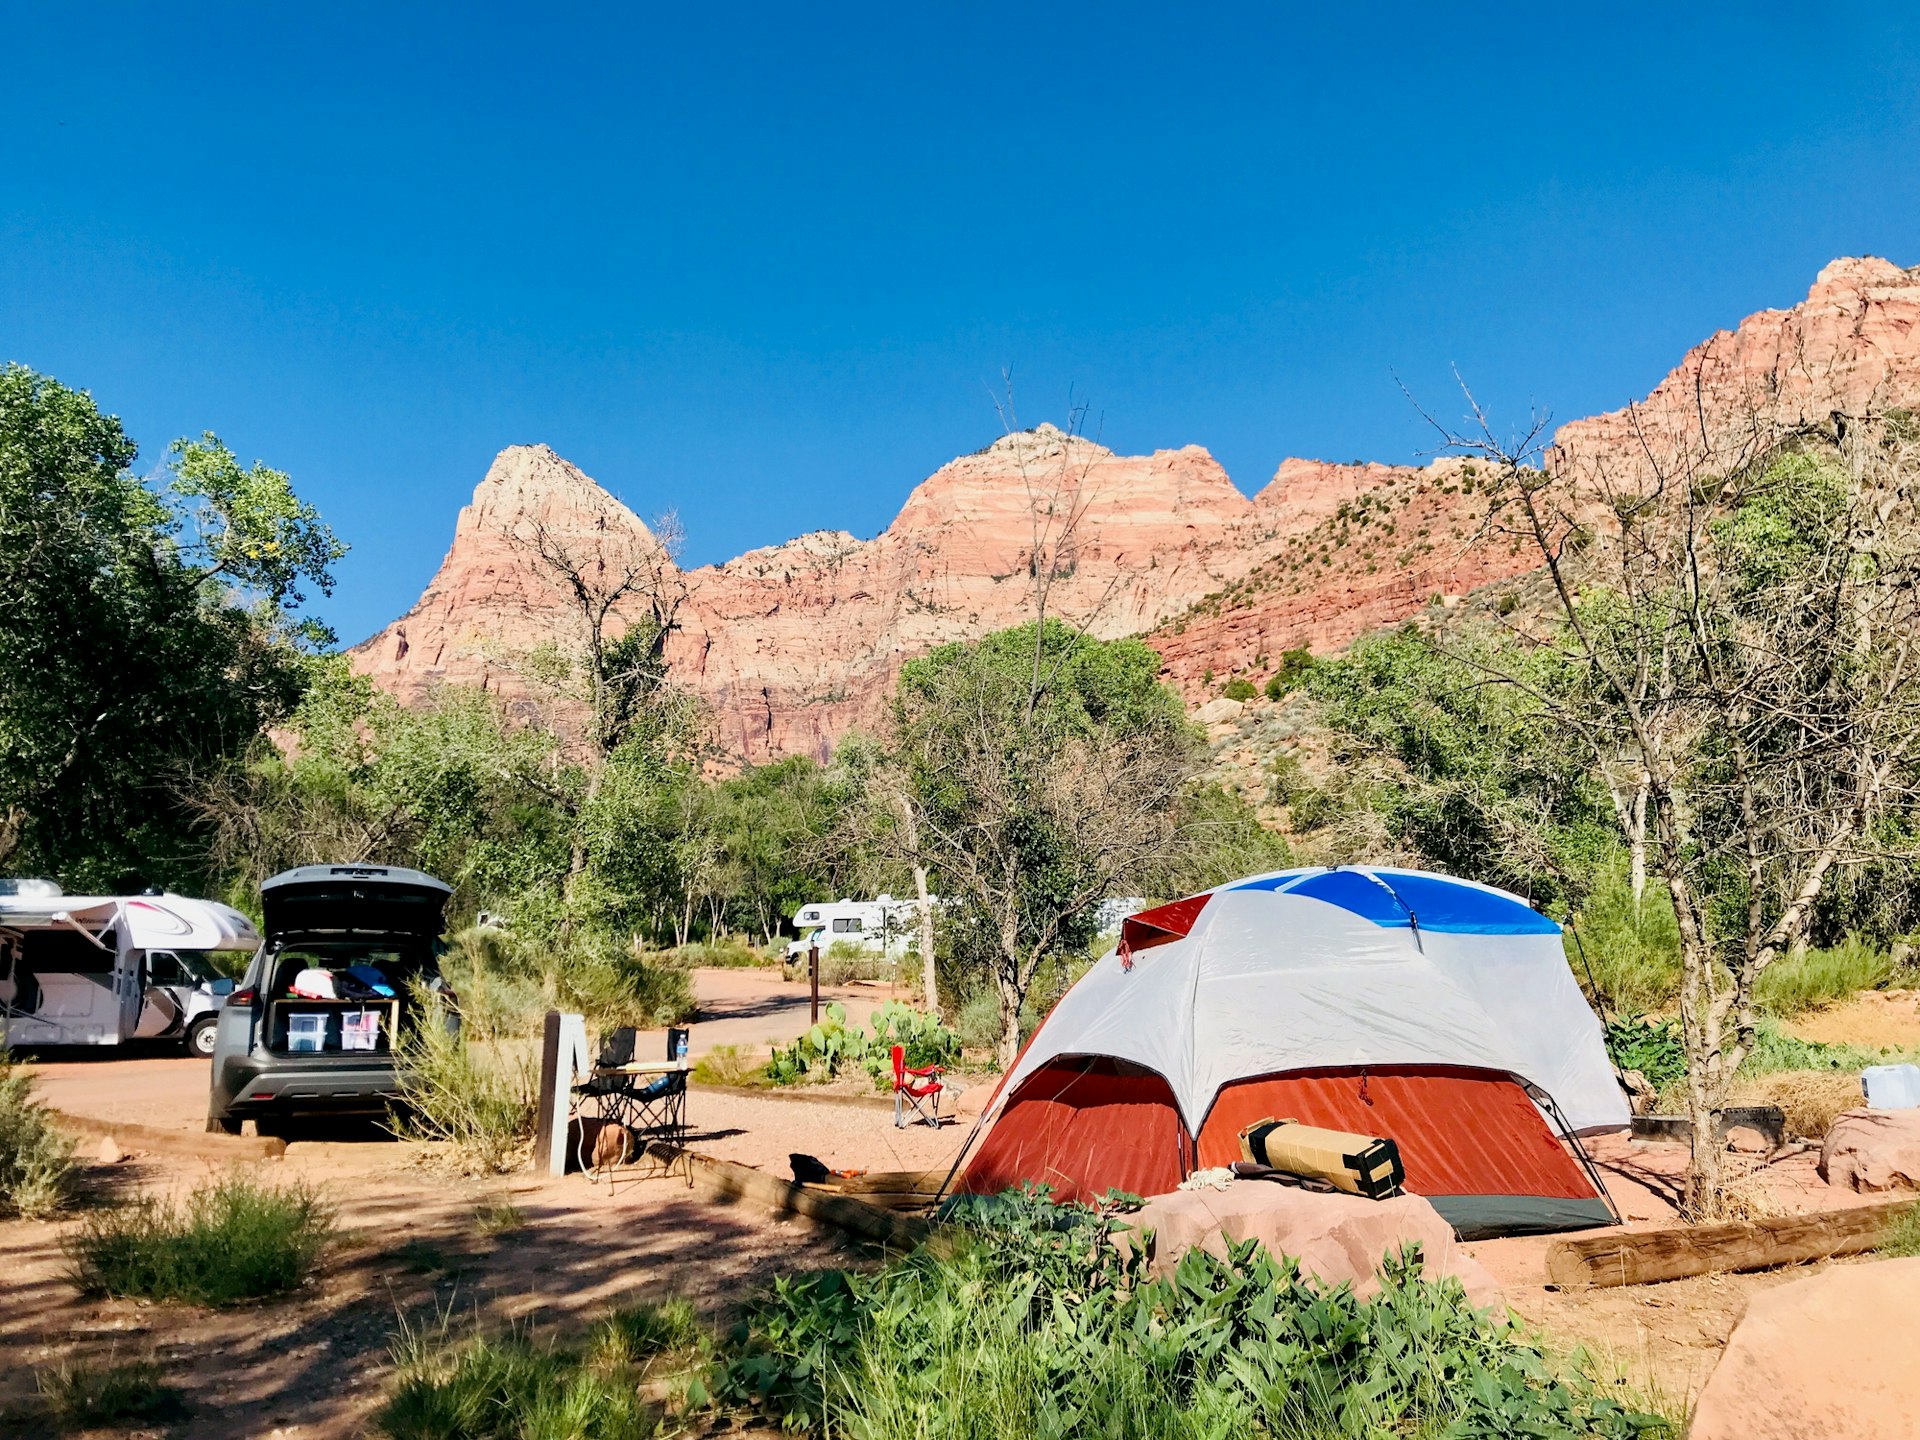 Tents and RVs camping in a national park